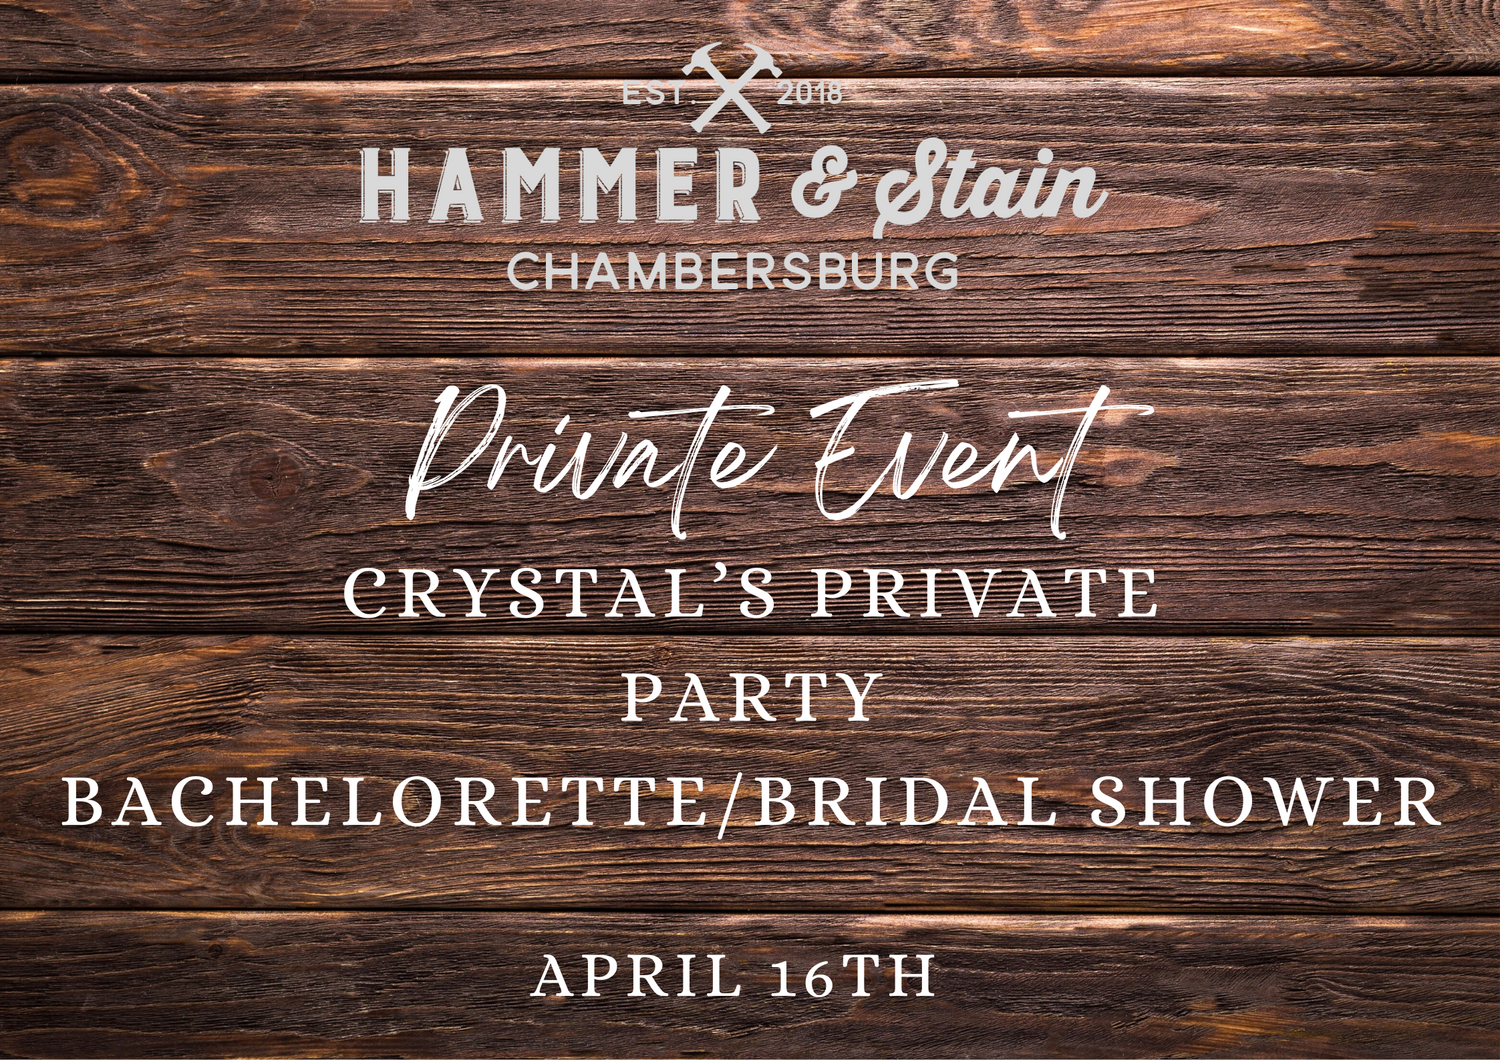 04/16/24 Crystal's Private Party- Bachelorette/Bridal Shower 5:30p